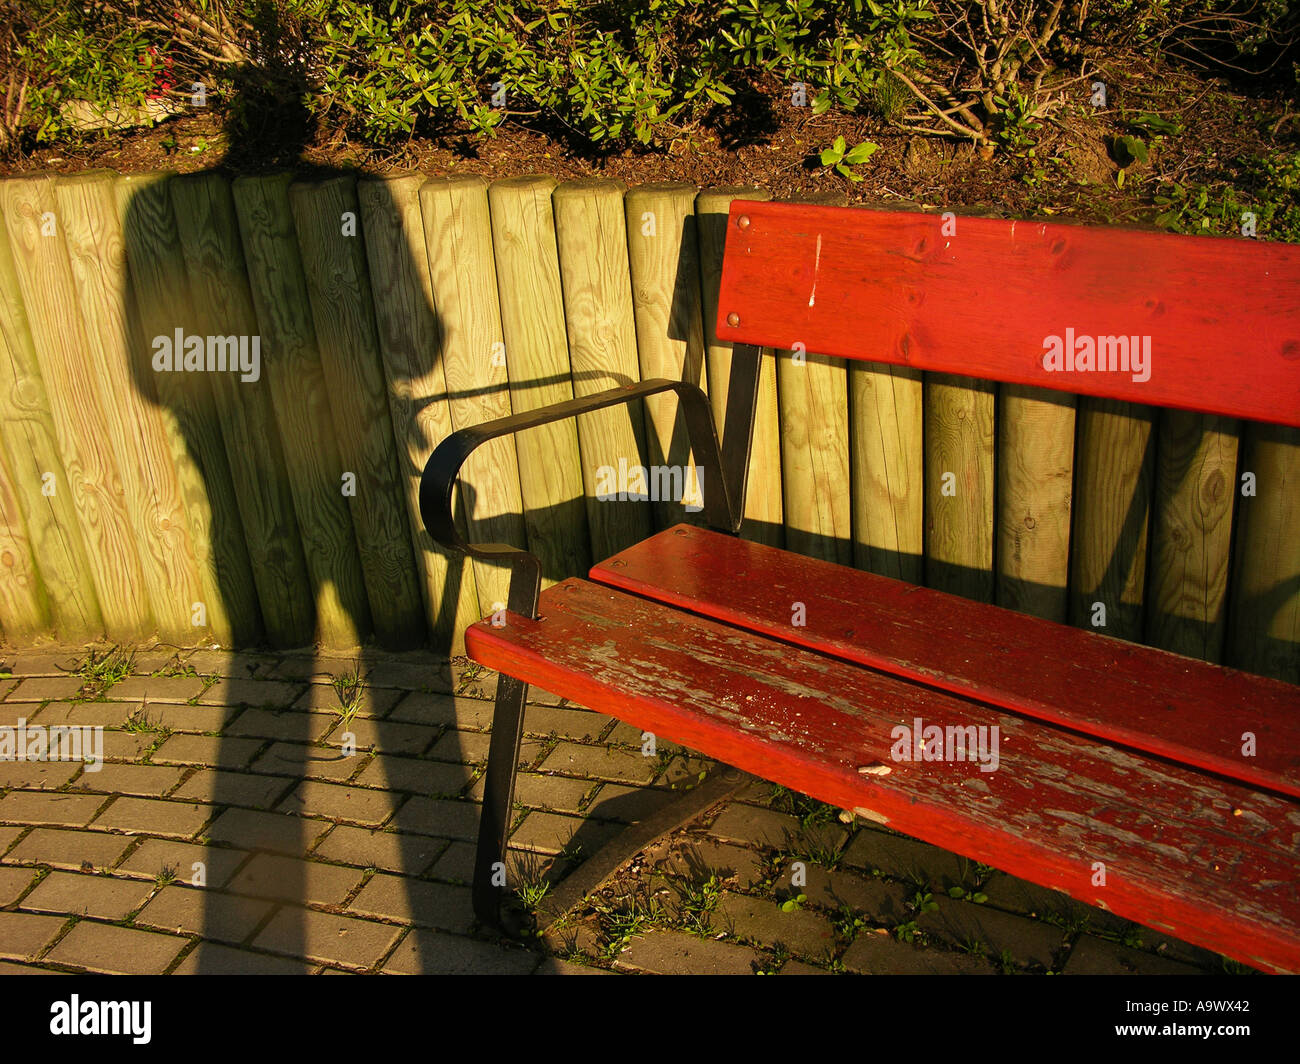 Shadow of a man standing next to a red park bench Stock Photo